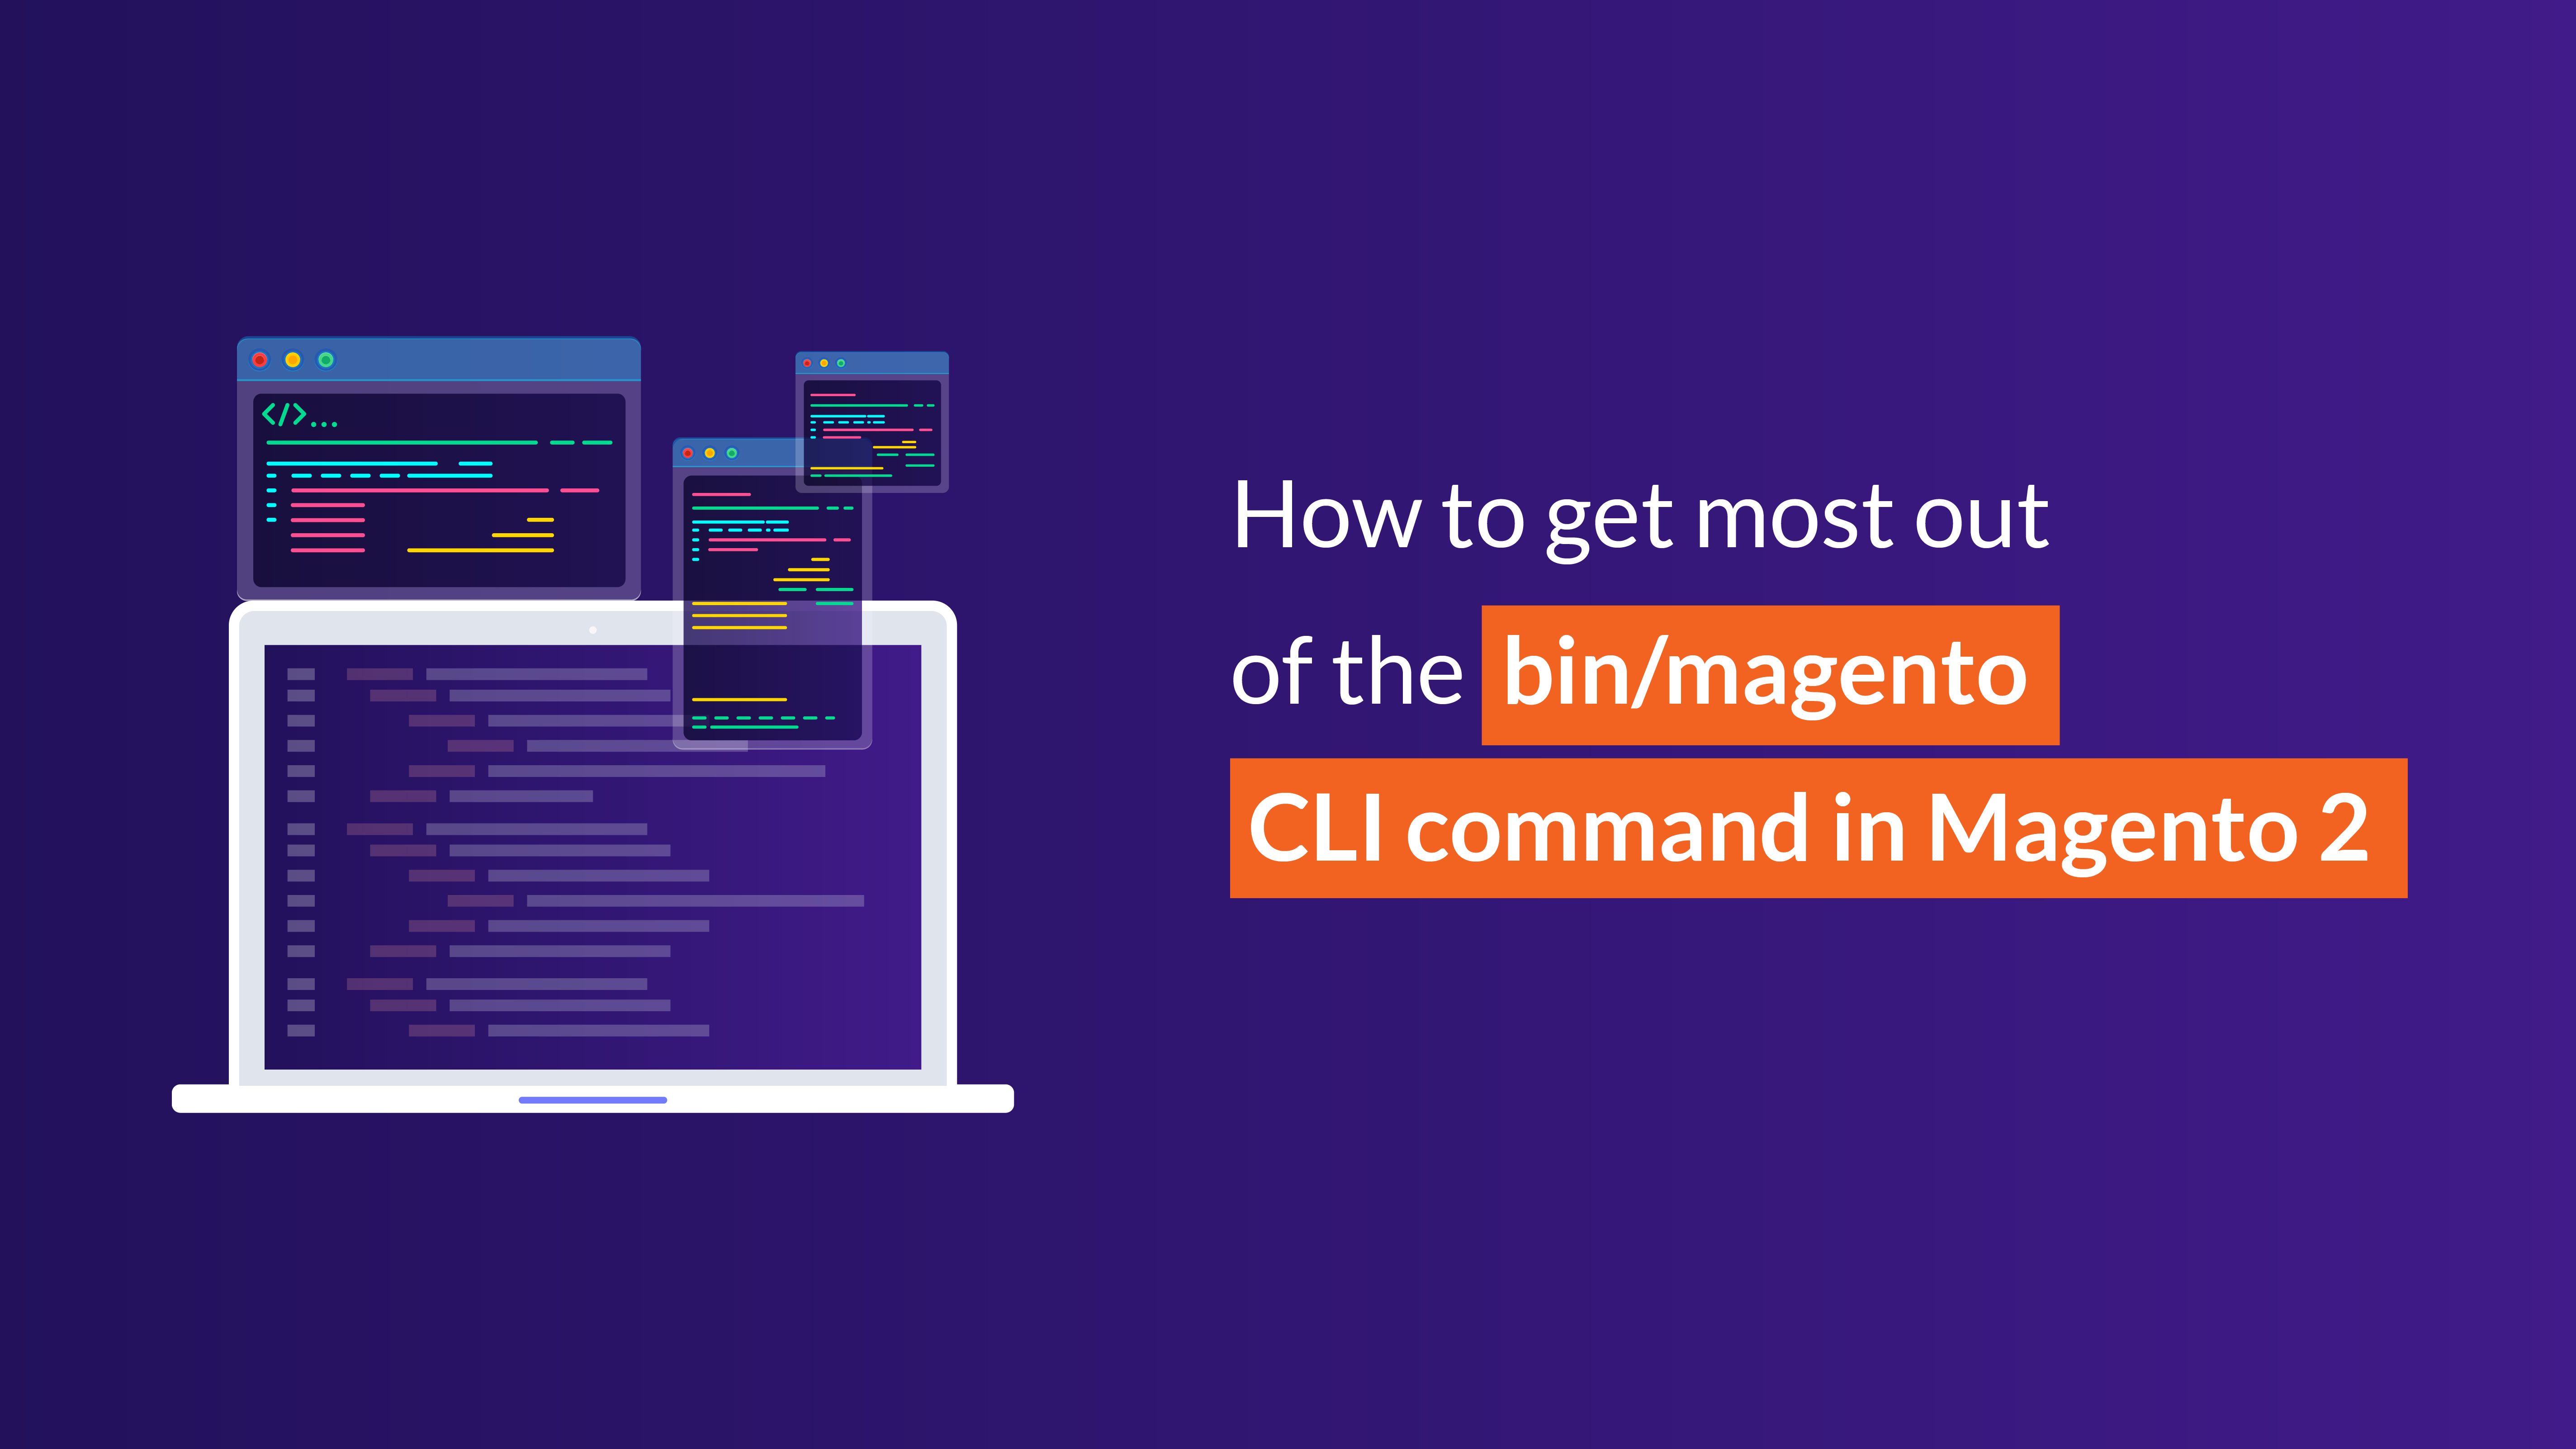 How to get most out of the bin/magento CLI command in Magento 2 title image